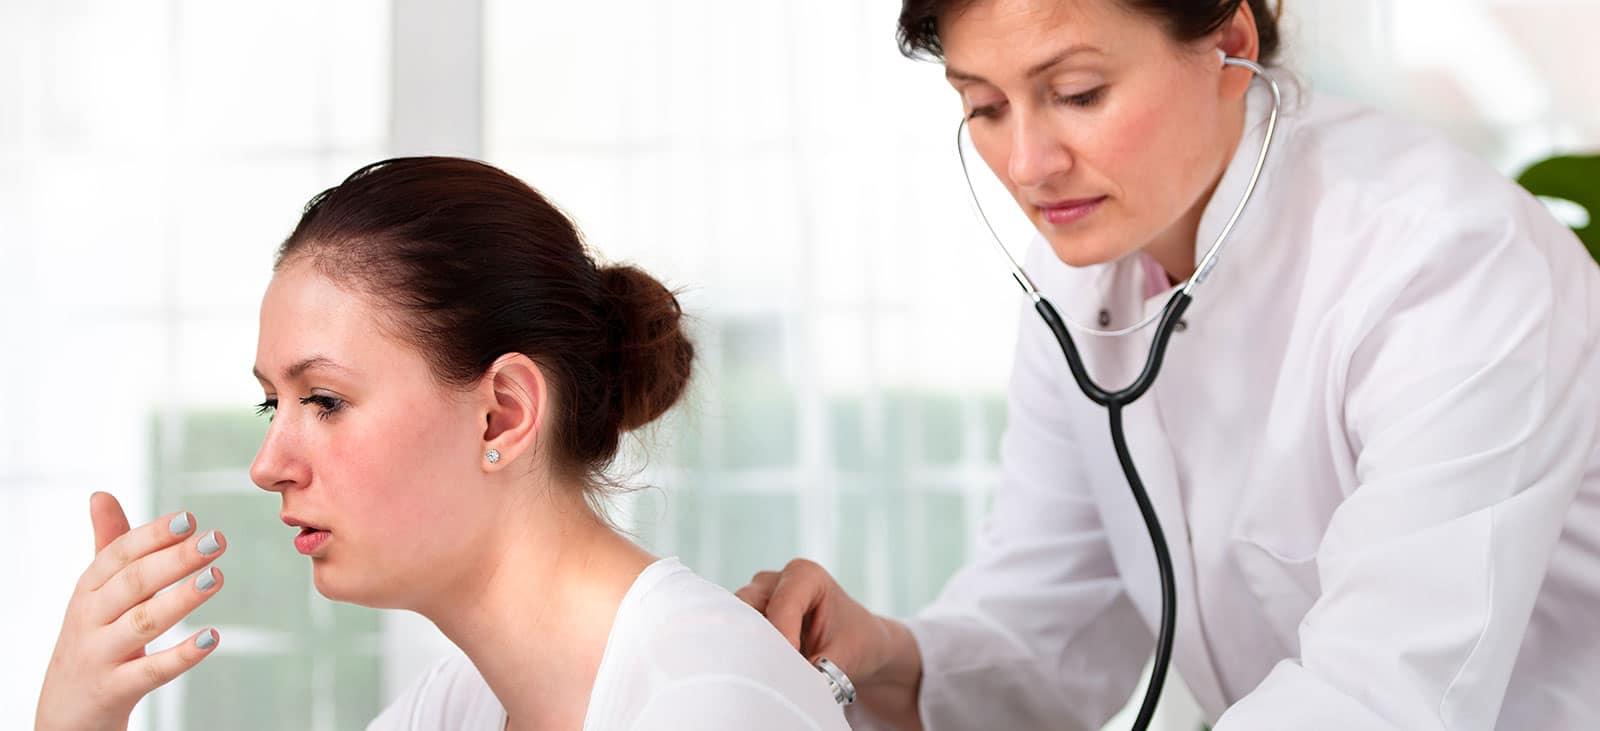 Image of a doctor treating a patient on PSA Financial's website